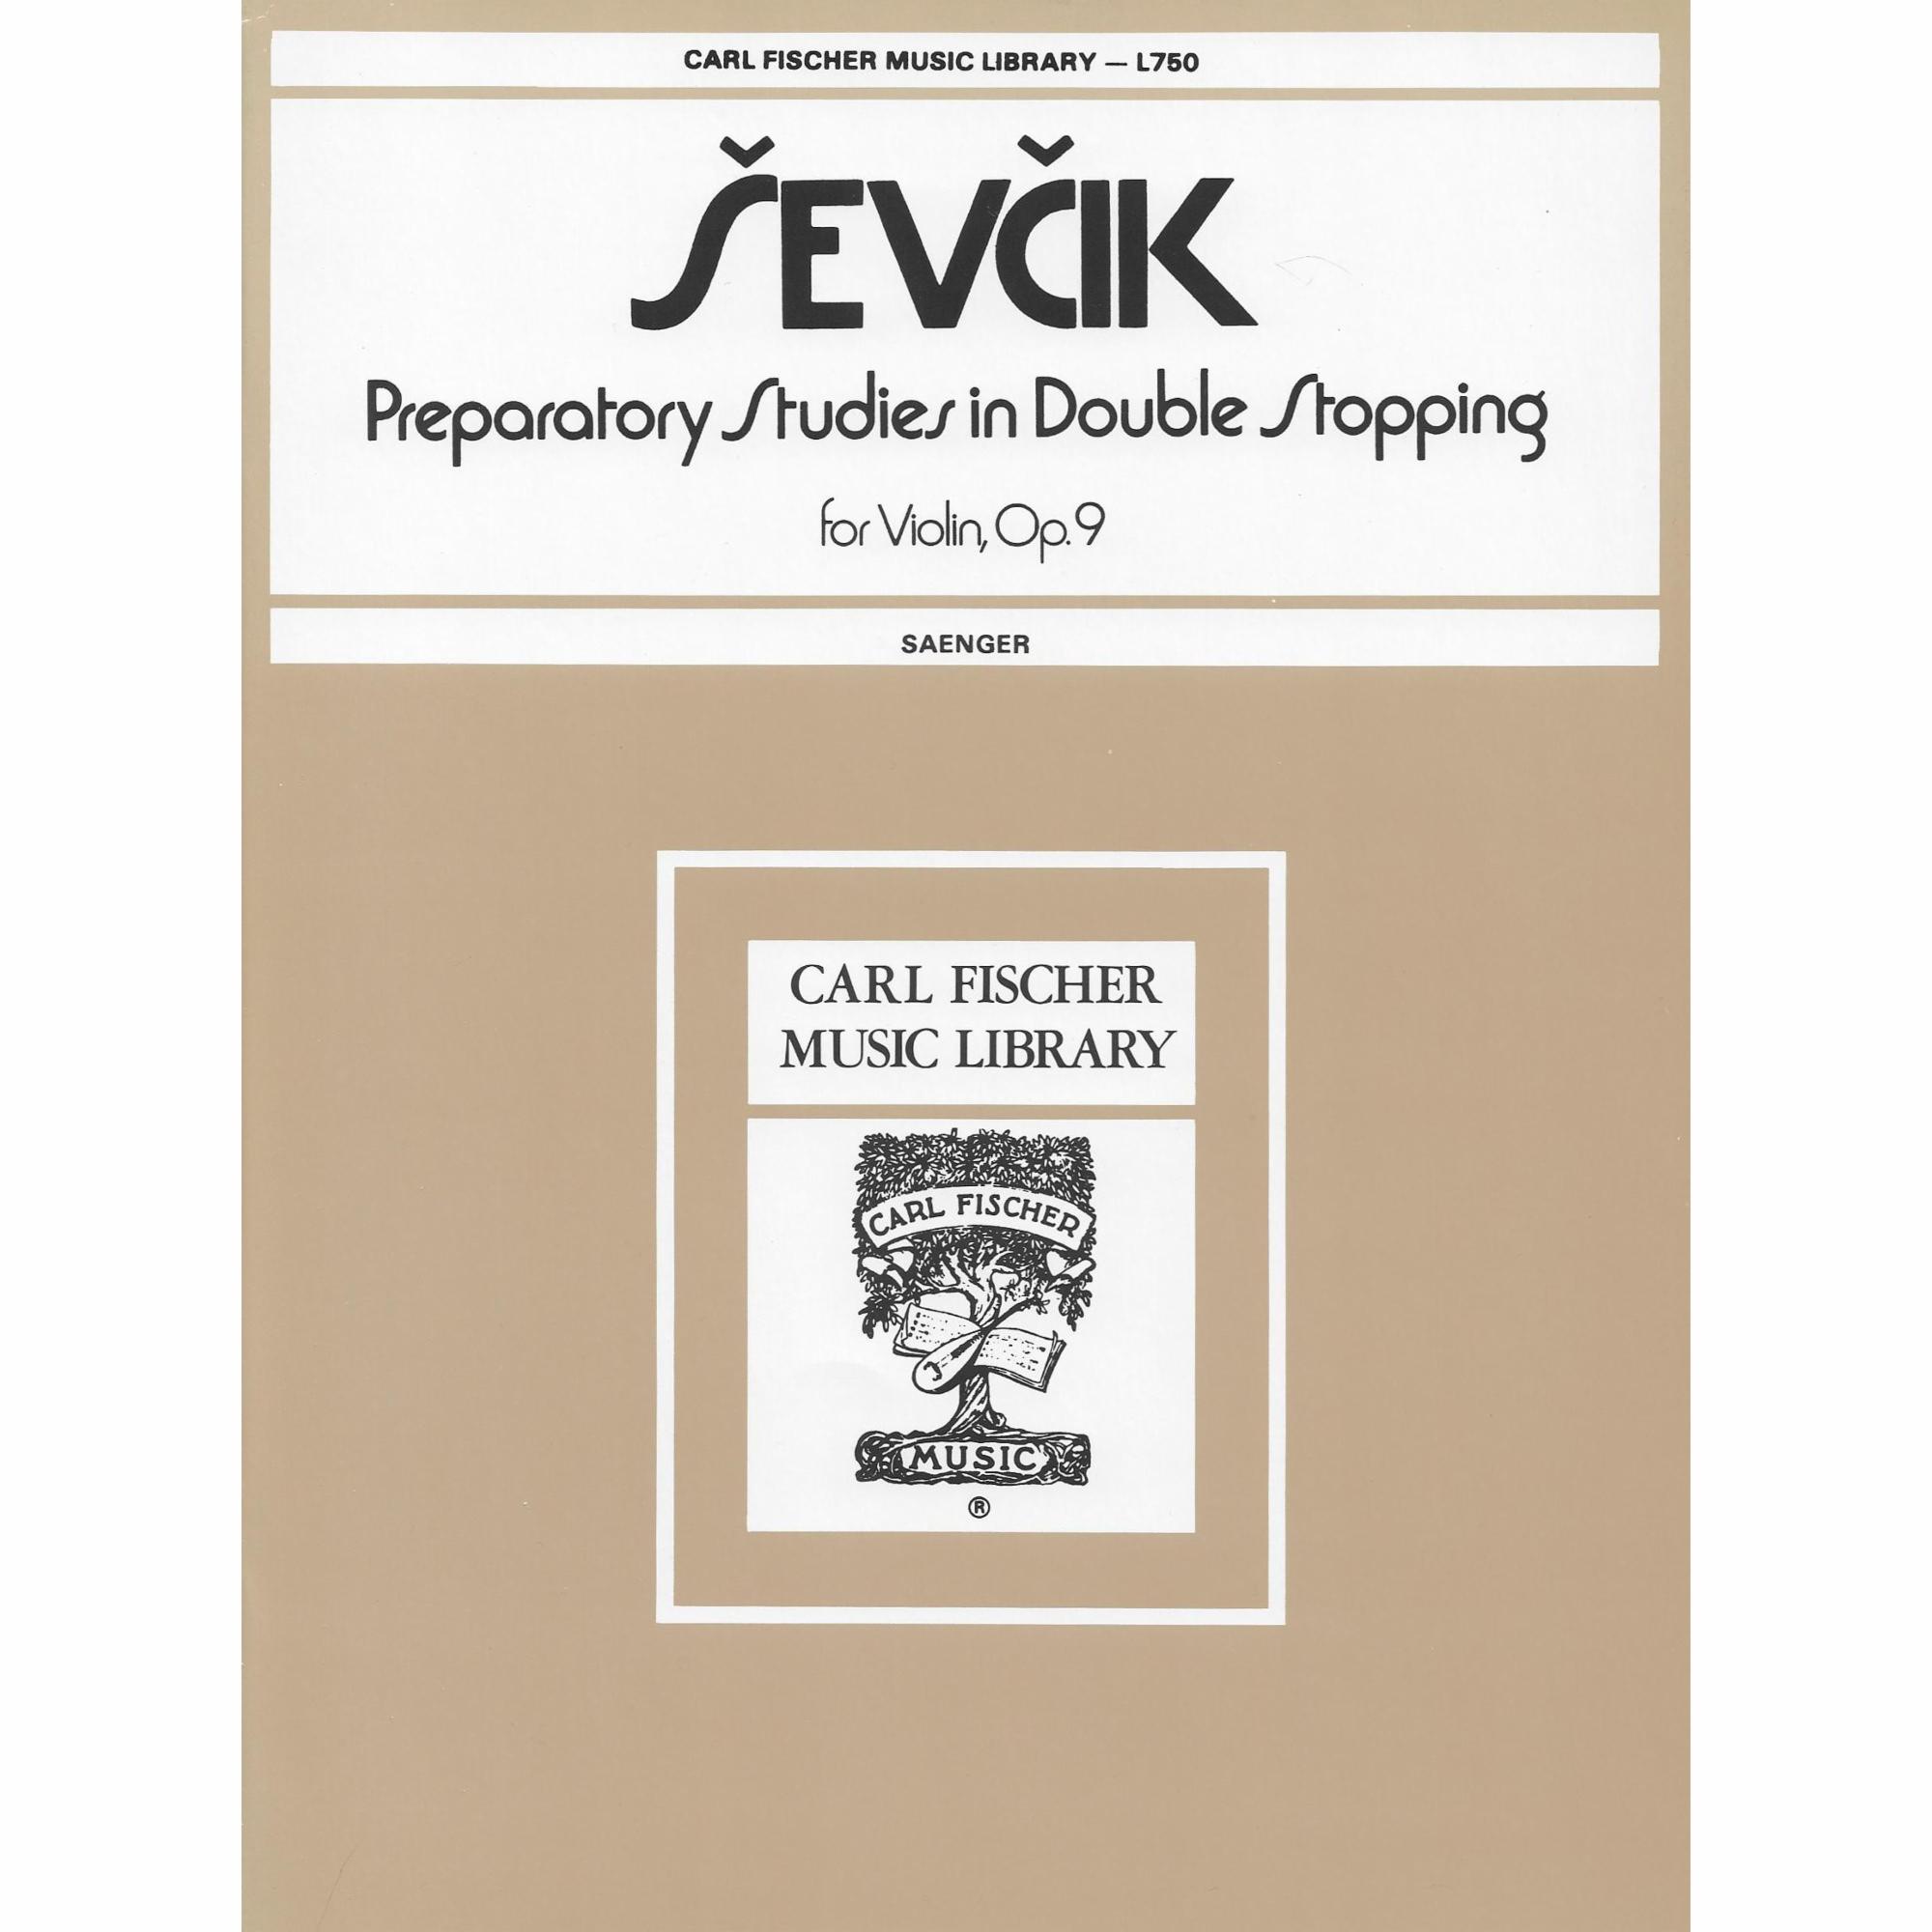 Sevcik -- Preparatory Studies in Double-Stopping, Op. 9 for Violin